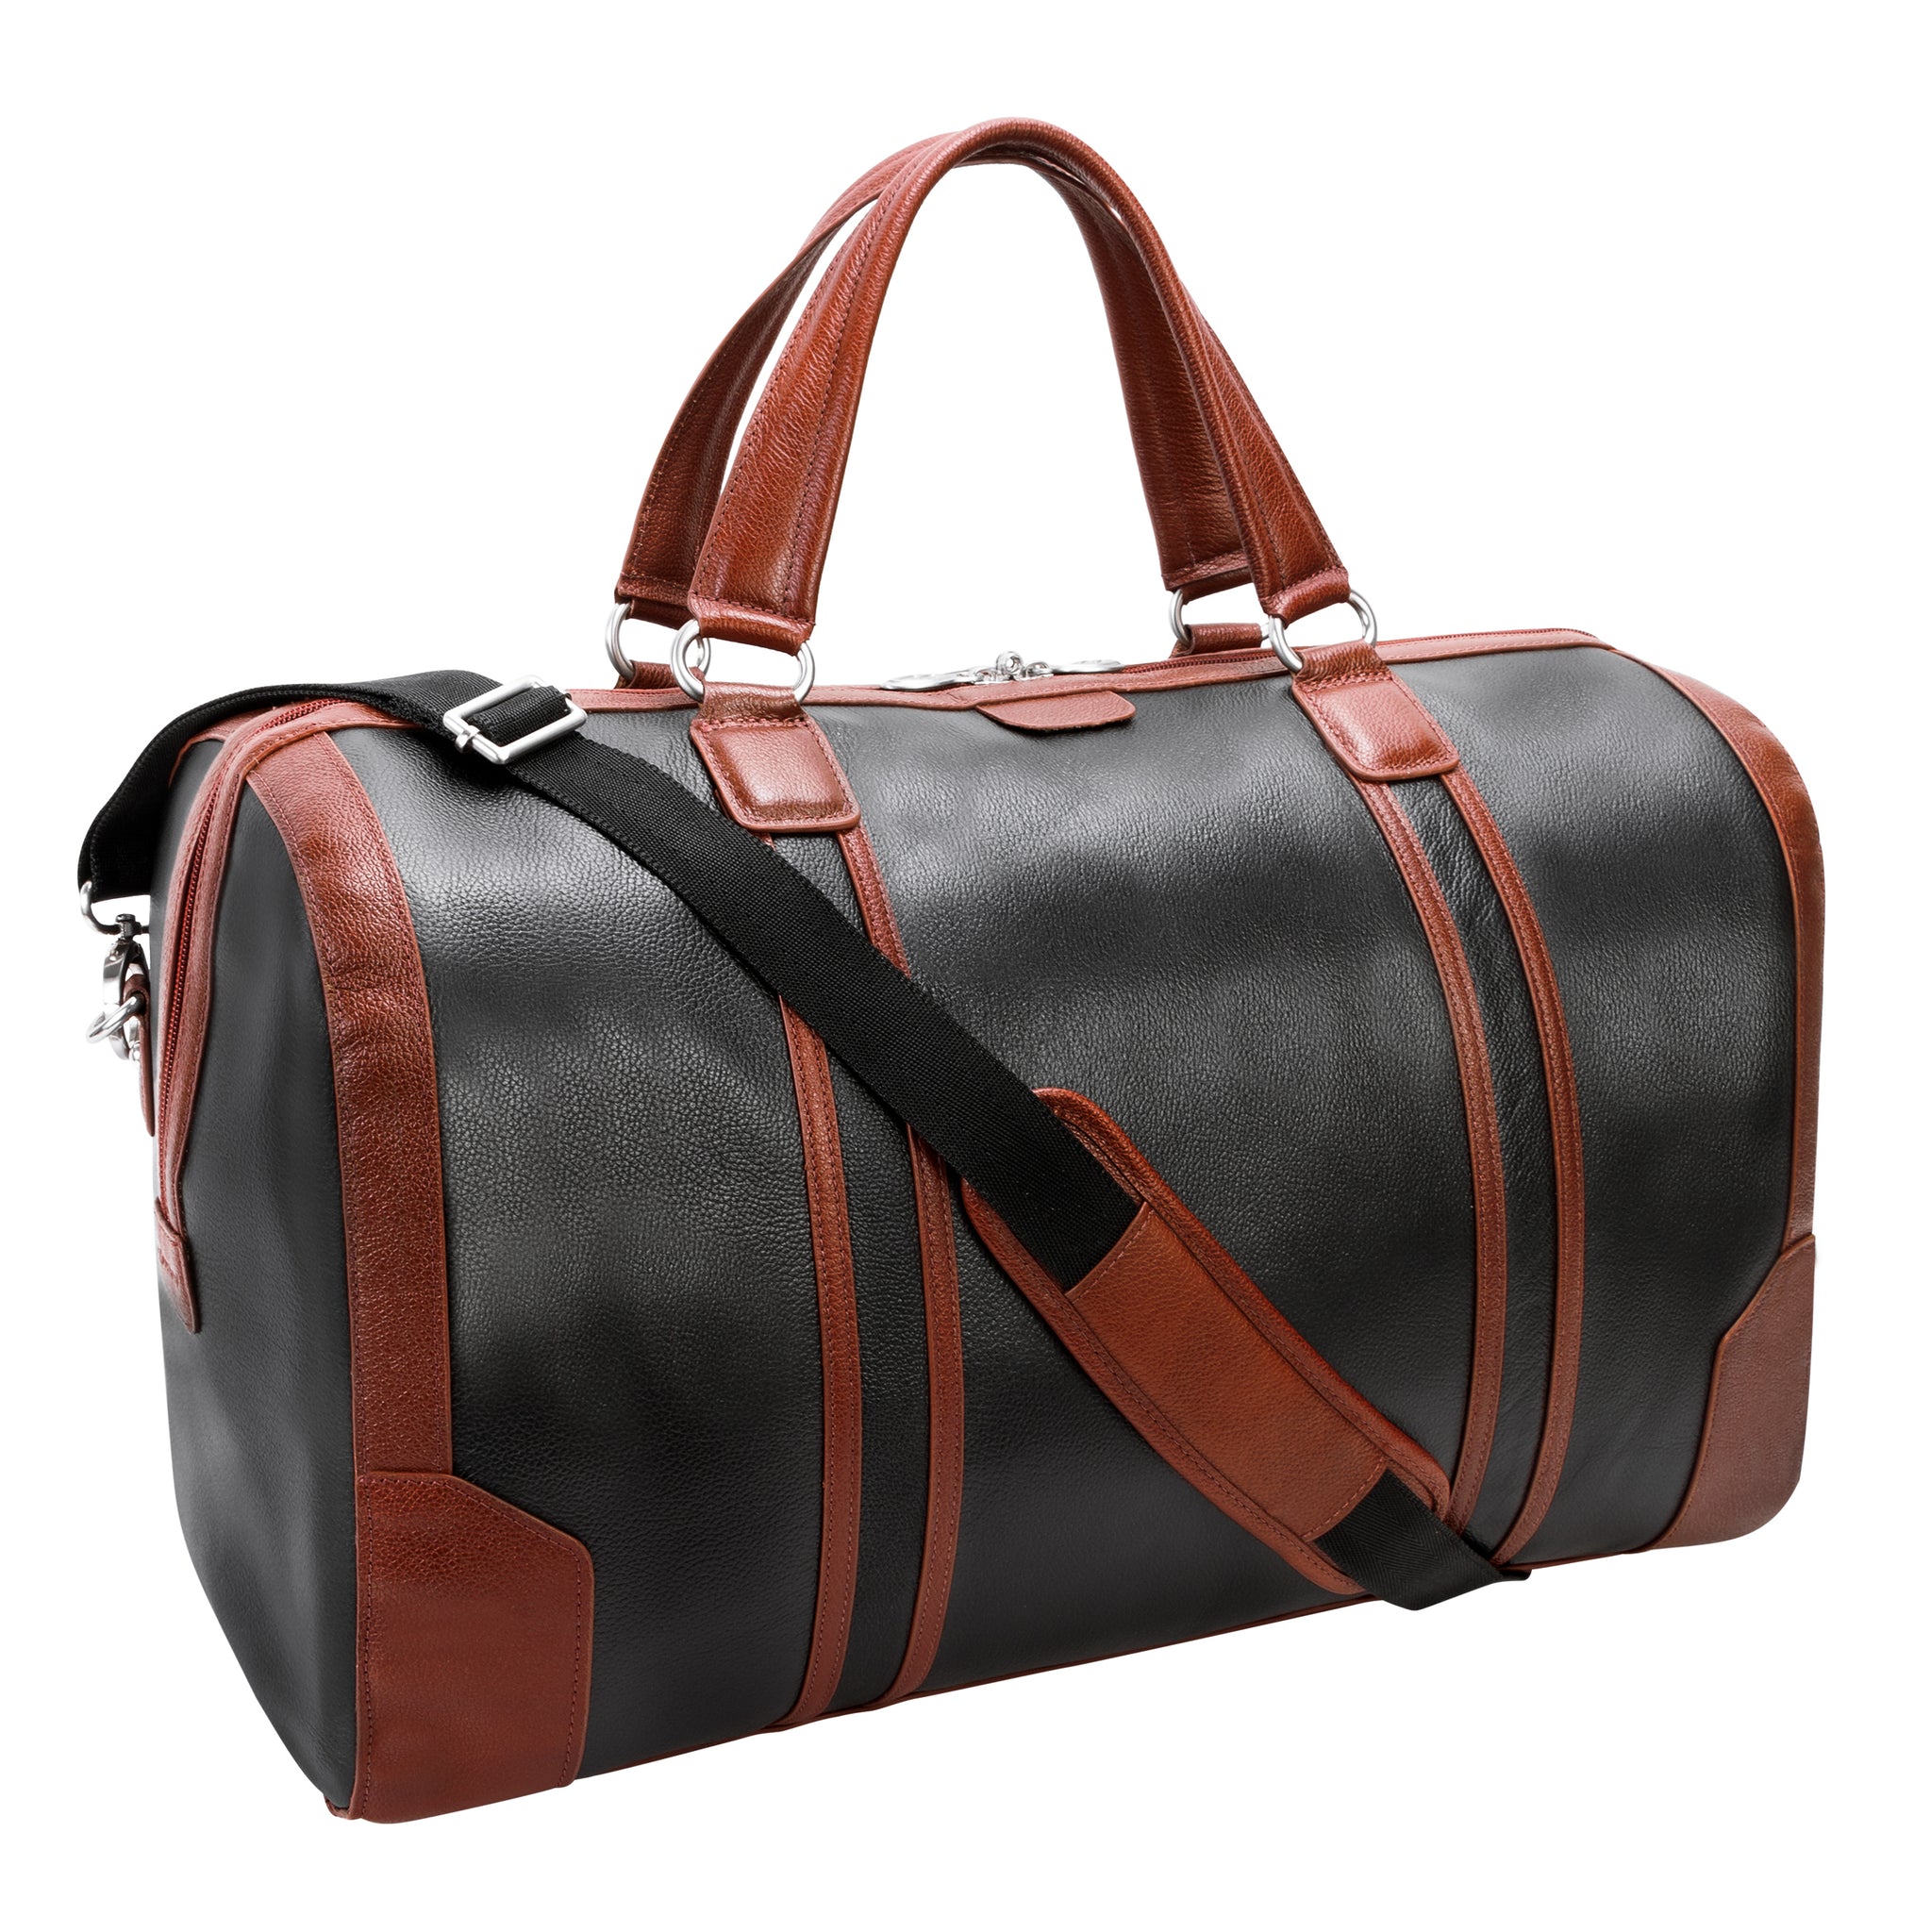 McKlein KINZIE 20" Leather, Two-Tone, Tablet Carry-All Duffel